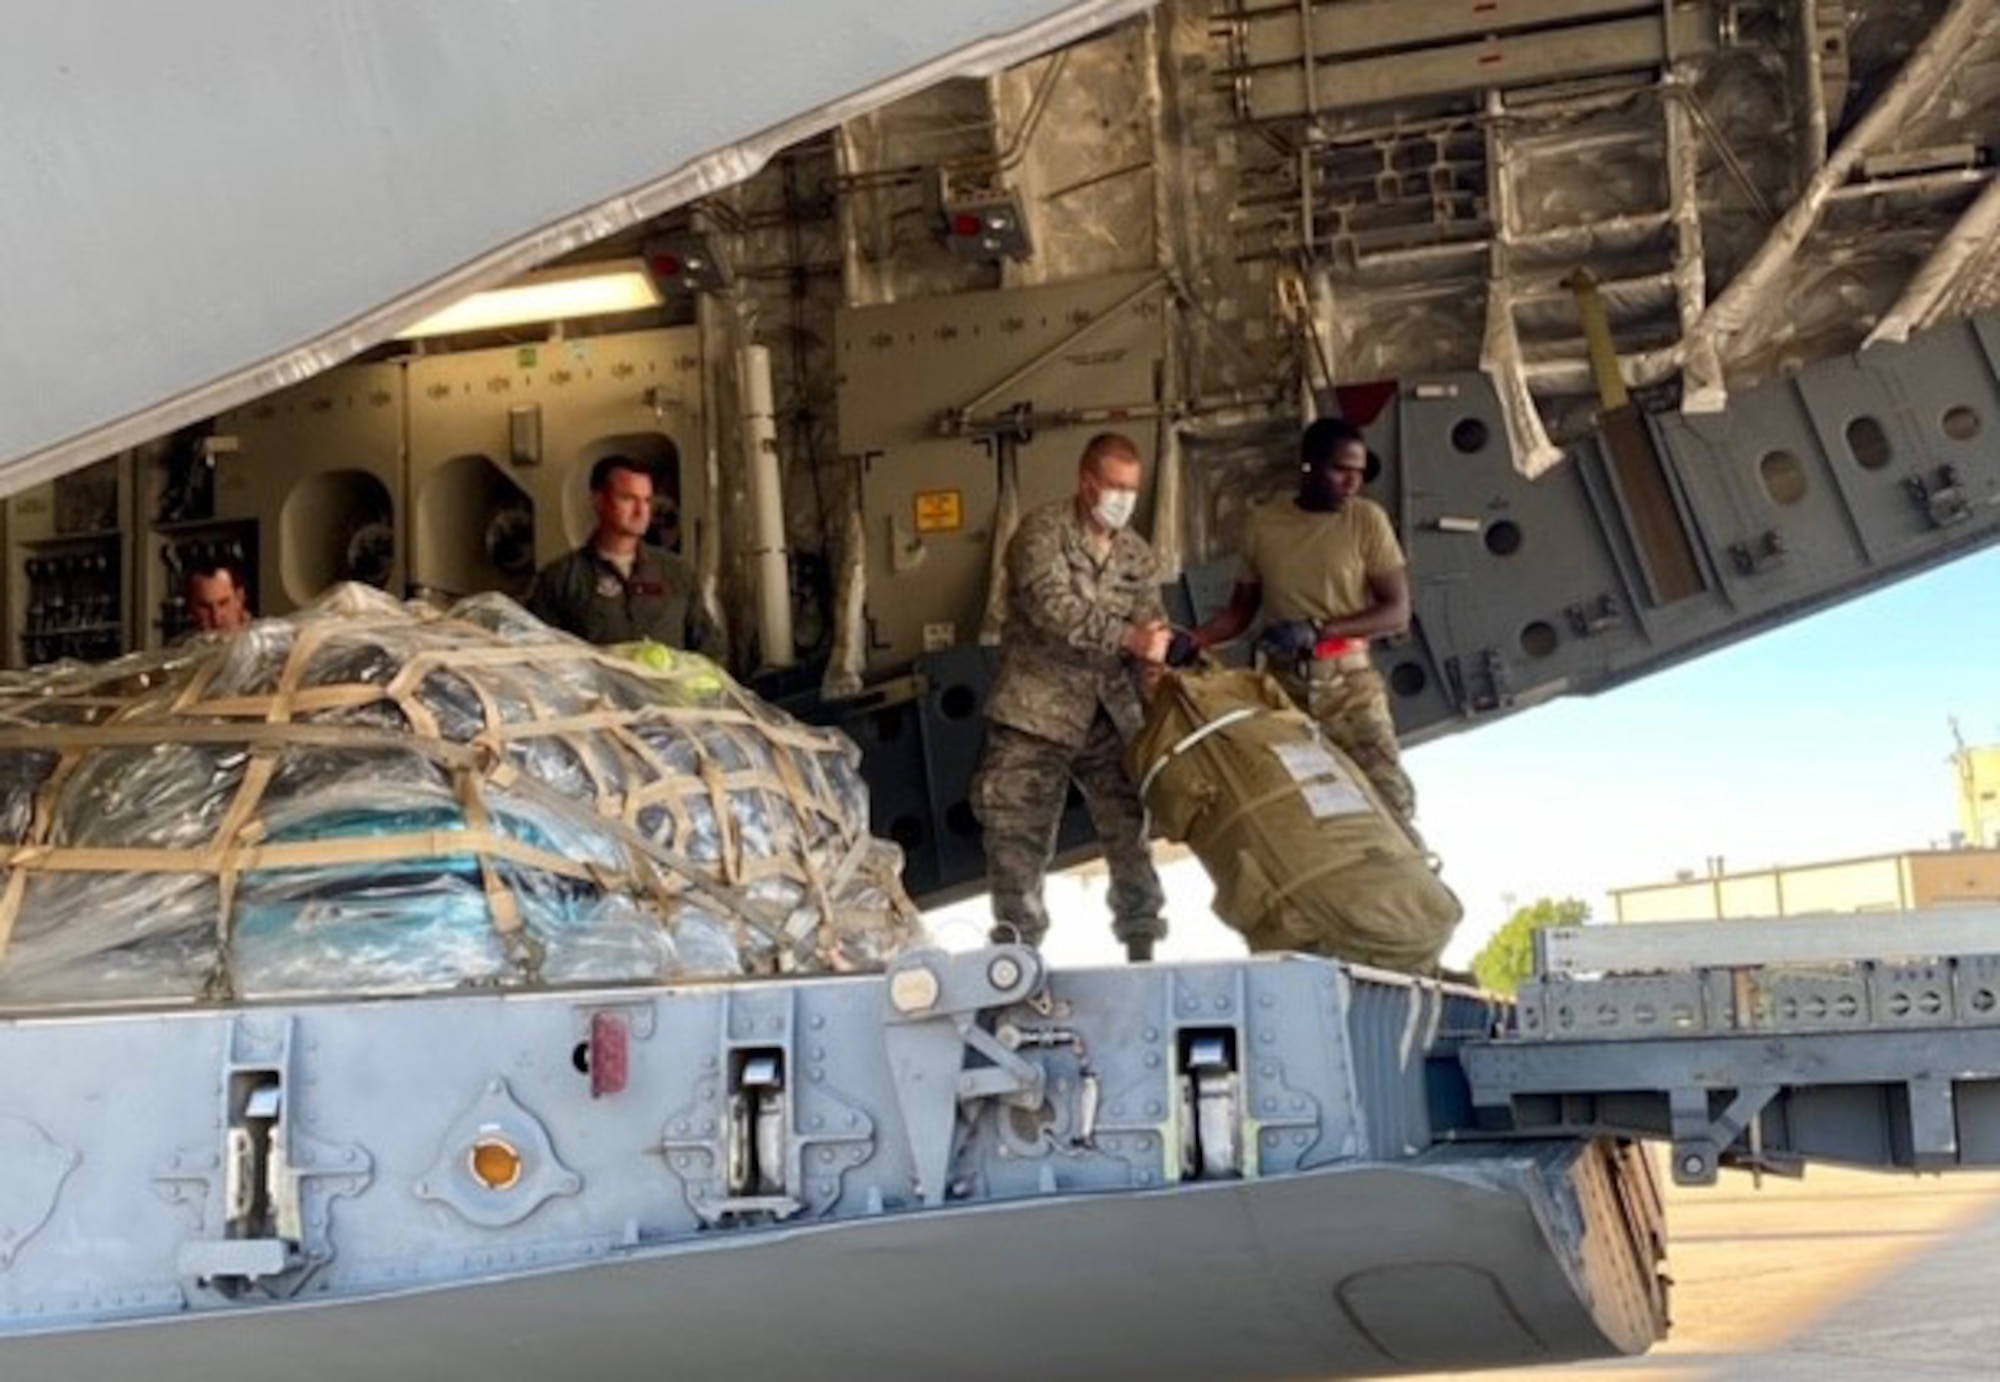 301st Fighter Wing Commander, Col. Allen Duckworth, second from right, helps to load luggage of deploying Airmen aboard a C-17 Globemaster III at U.S. Naval Air Station Joint Reserve Base, Fort Worth, Texas on April 22, 2020. This deployment is part of a larger mobilization package of more than 770 Air Force Reservists from across the nation who are taking care of Americans fighting COVID-19. (U.S. Air Force photo by Capt. Jessica Gross)